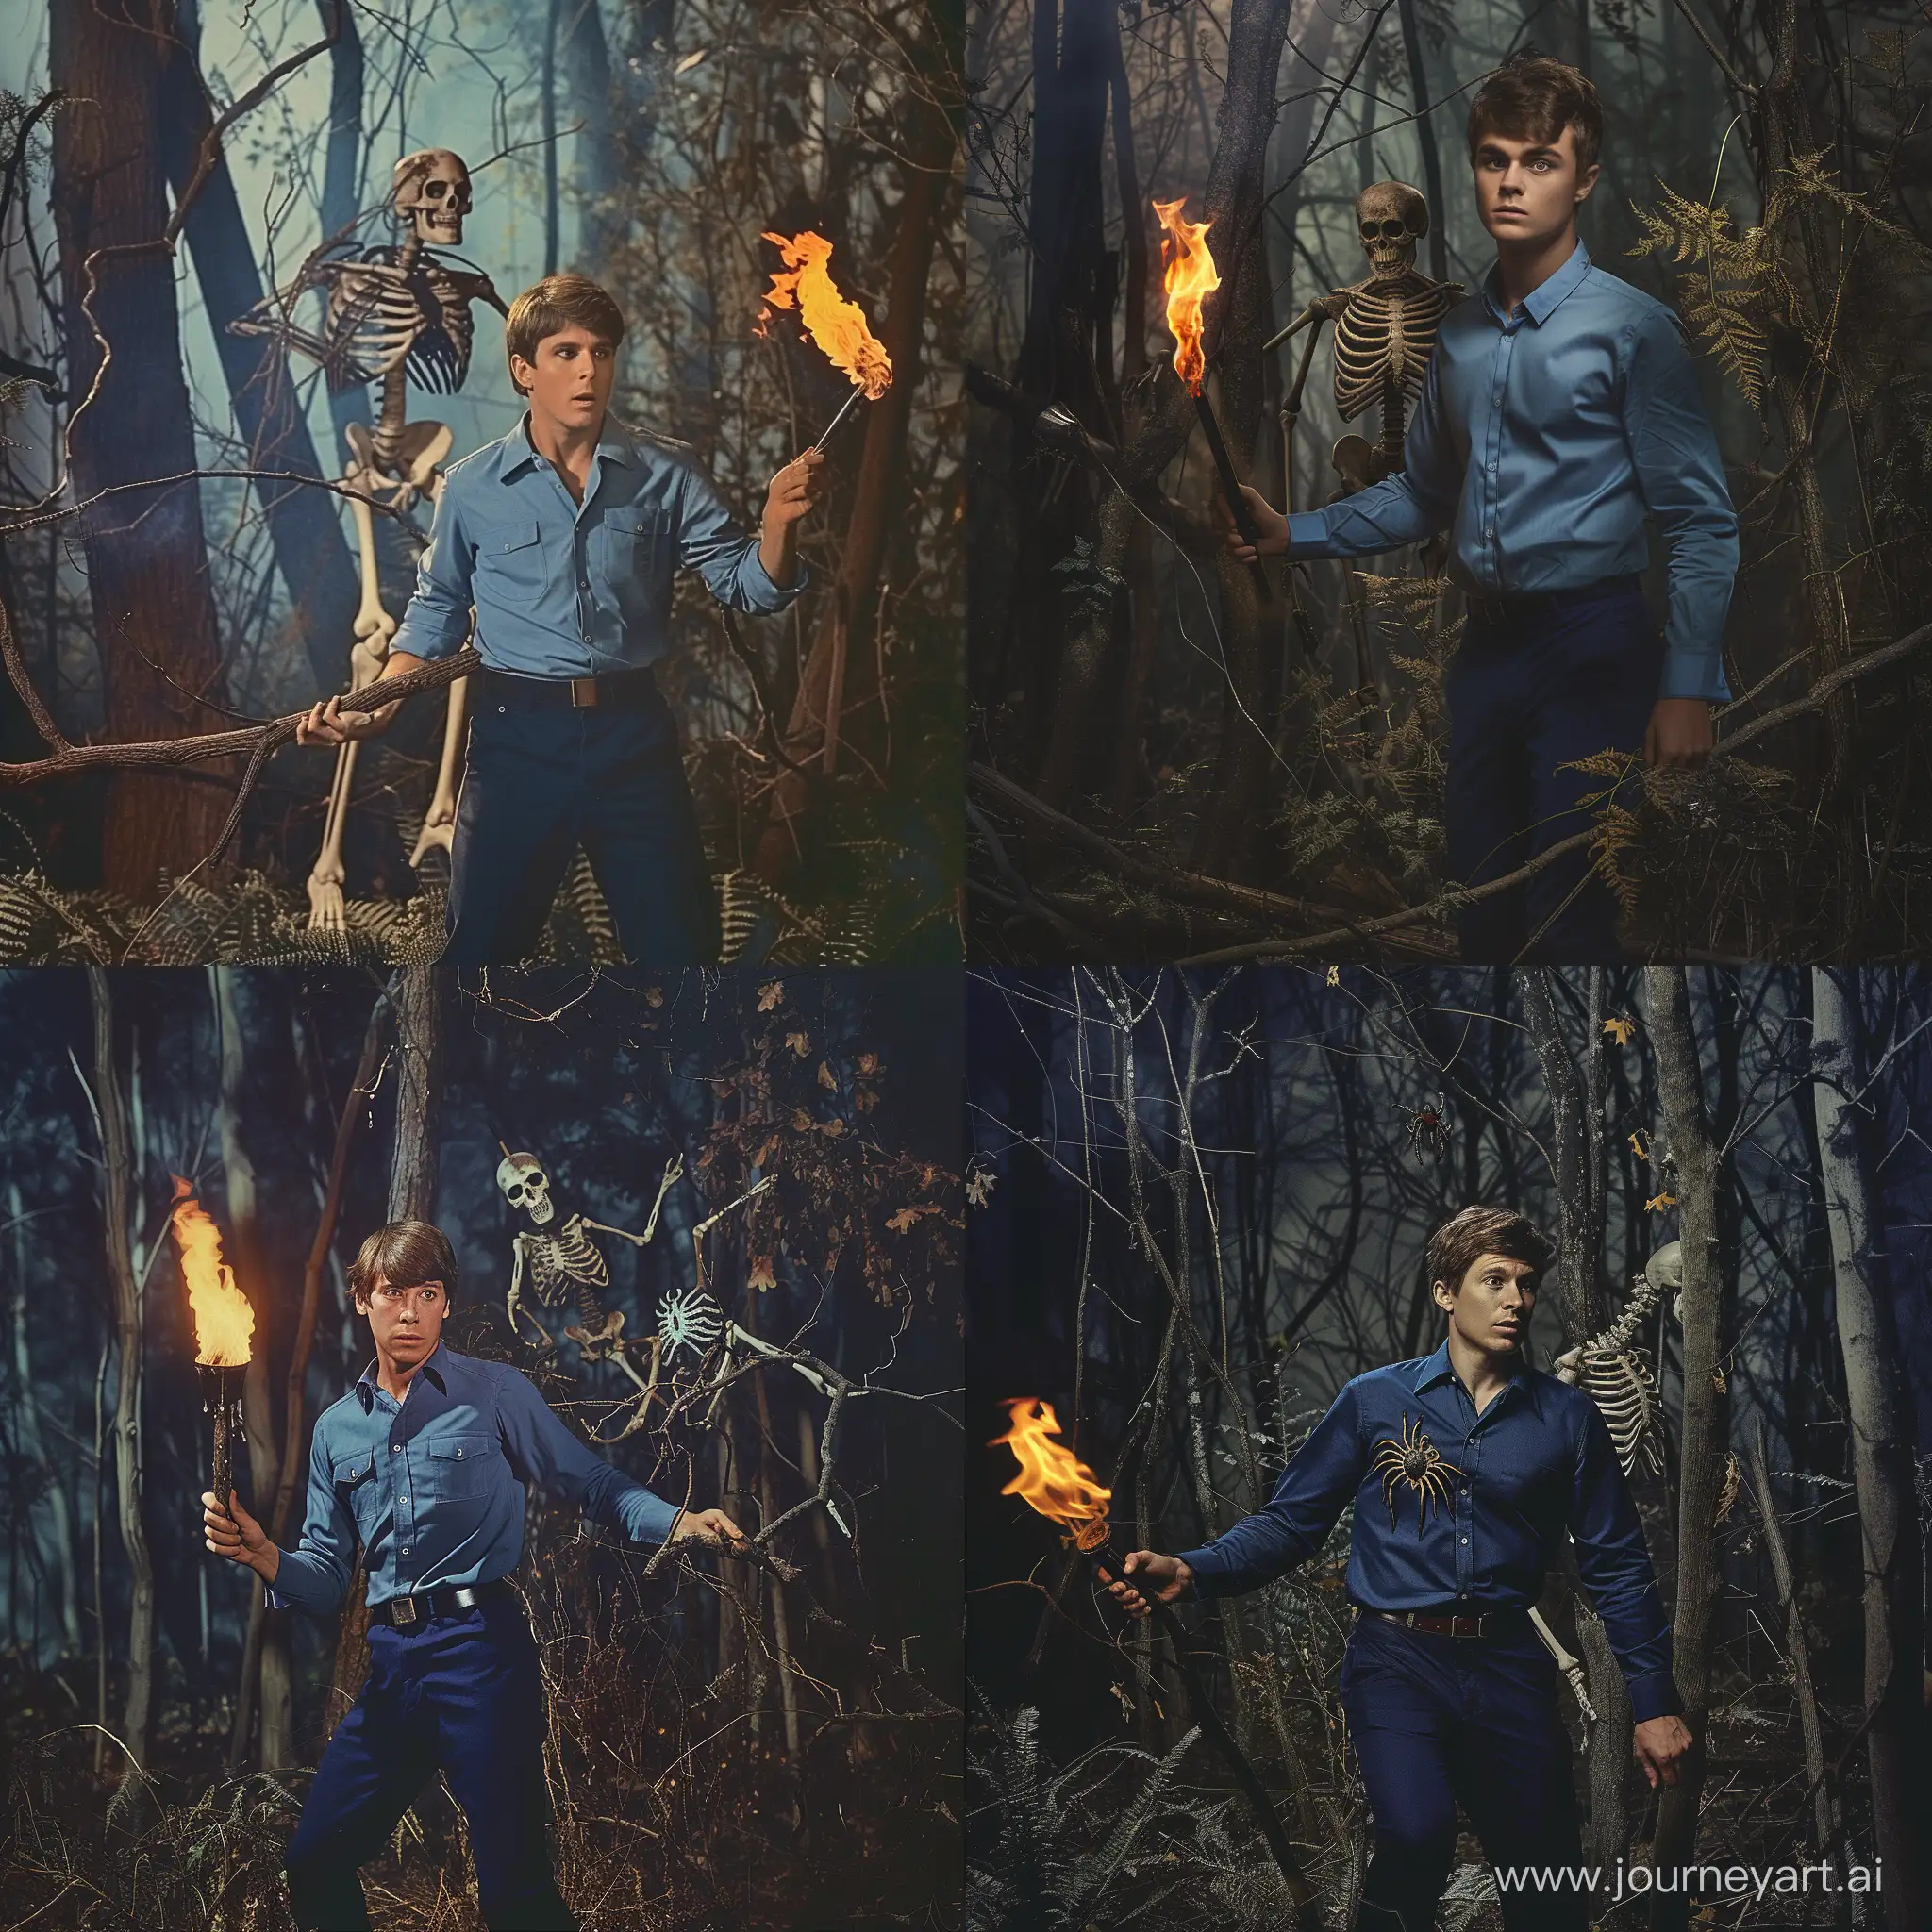 Young-Man-with-Torch-Confronting-Giant-Spider-in-Dark-Fantasy-Forest